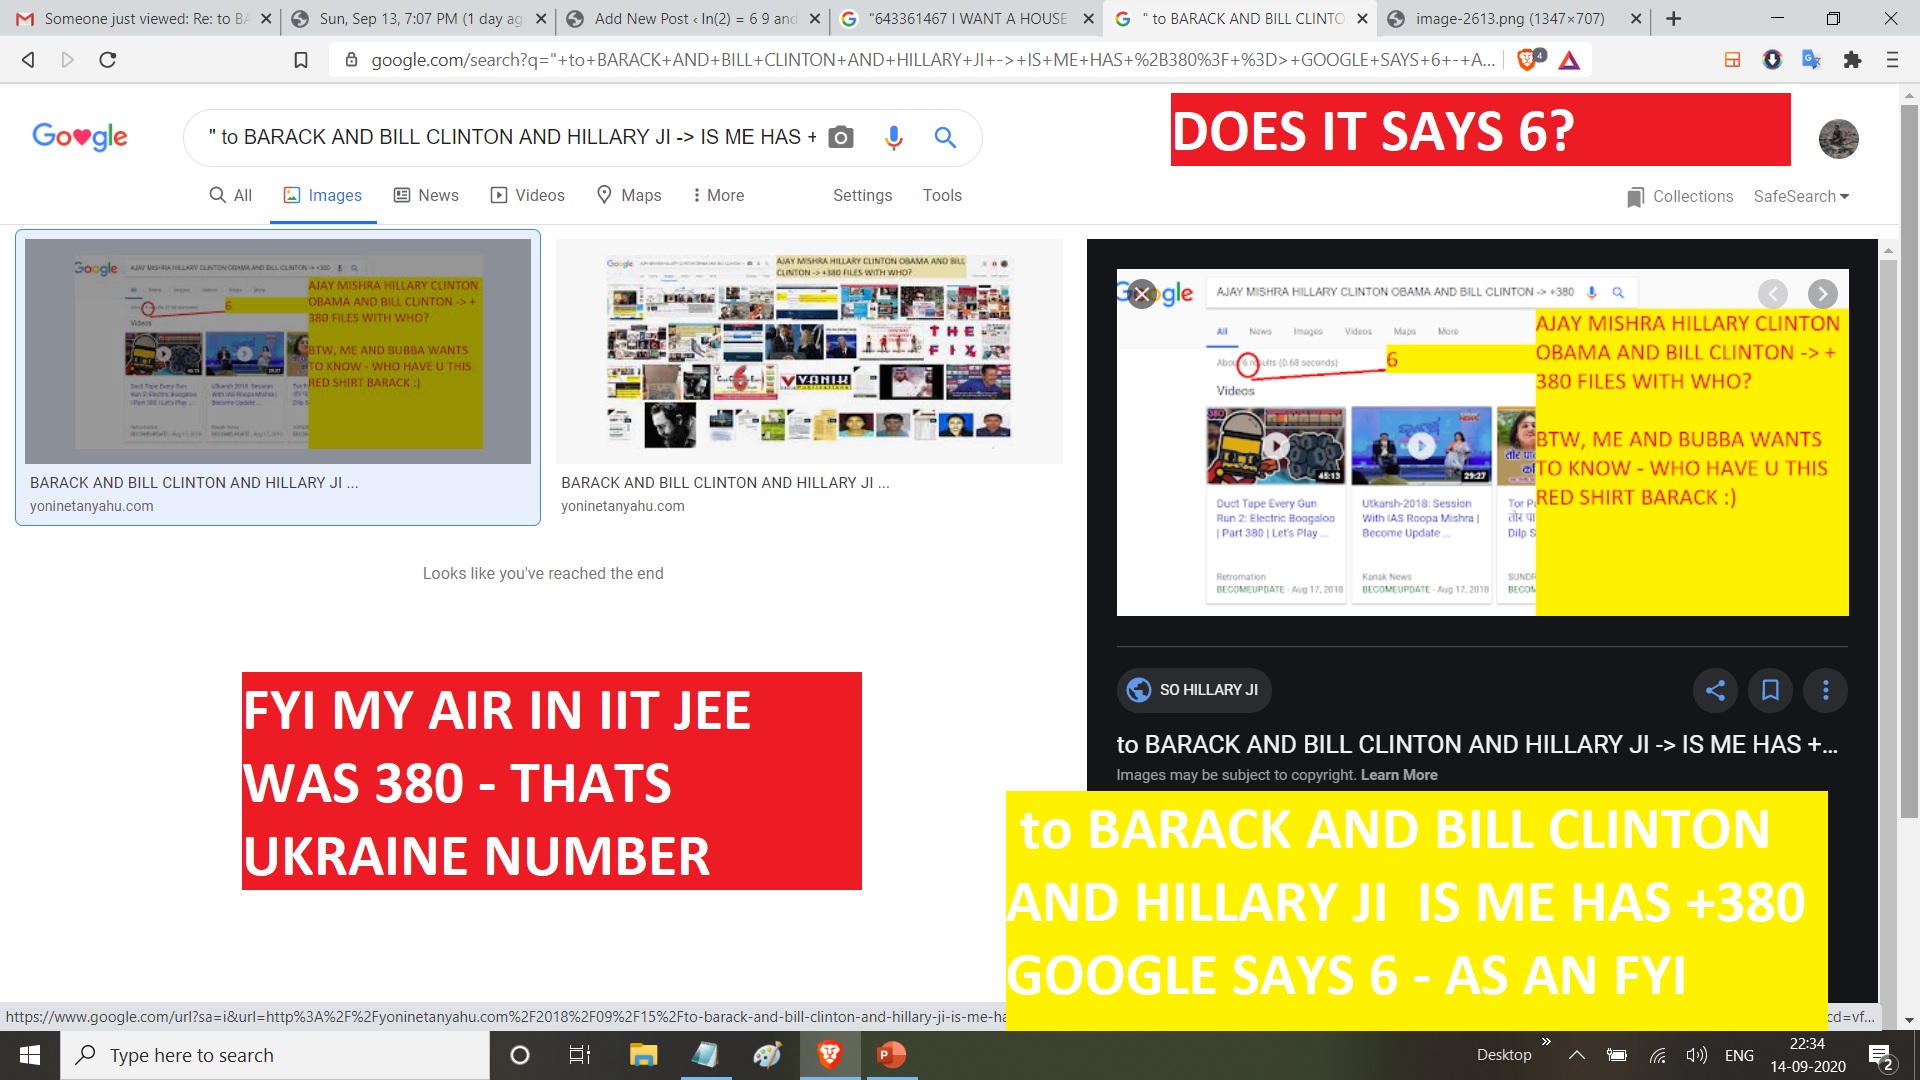 to BARACK AND BILL CLINTON AND HILLARY JI IS ME HAS +380 GOOGLE SAYS 6 - AS AN FYI